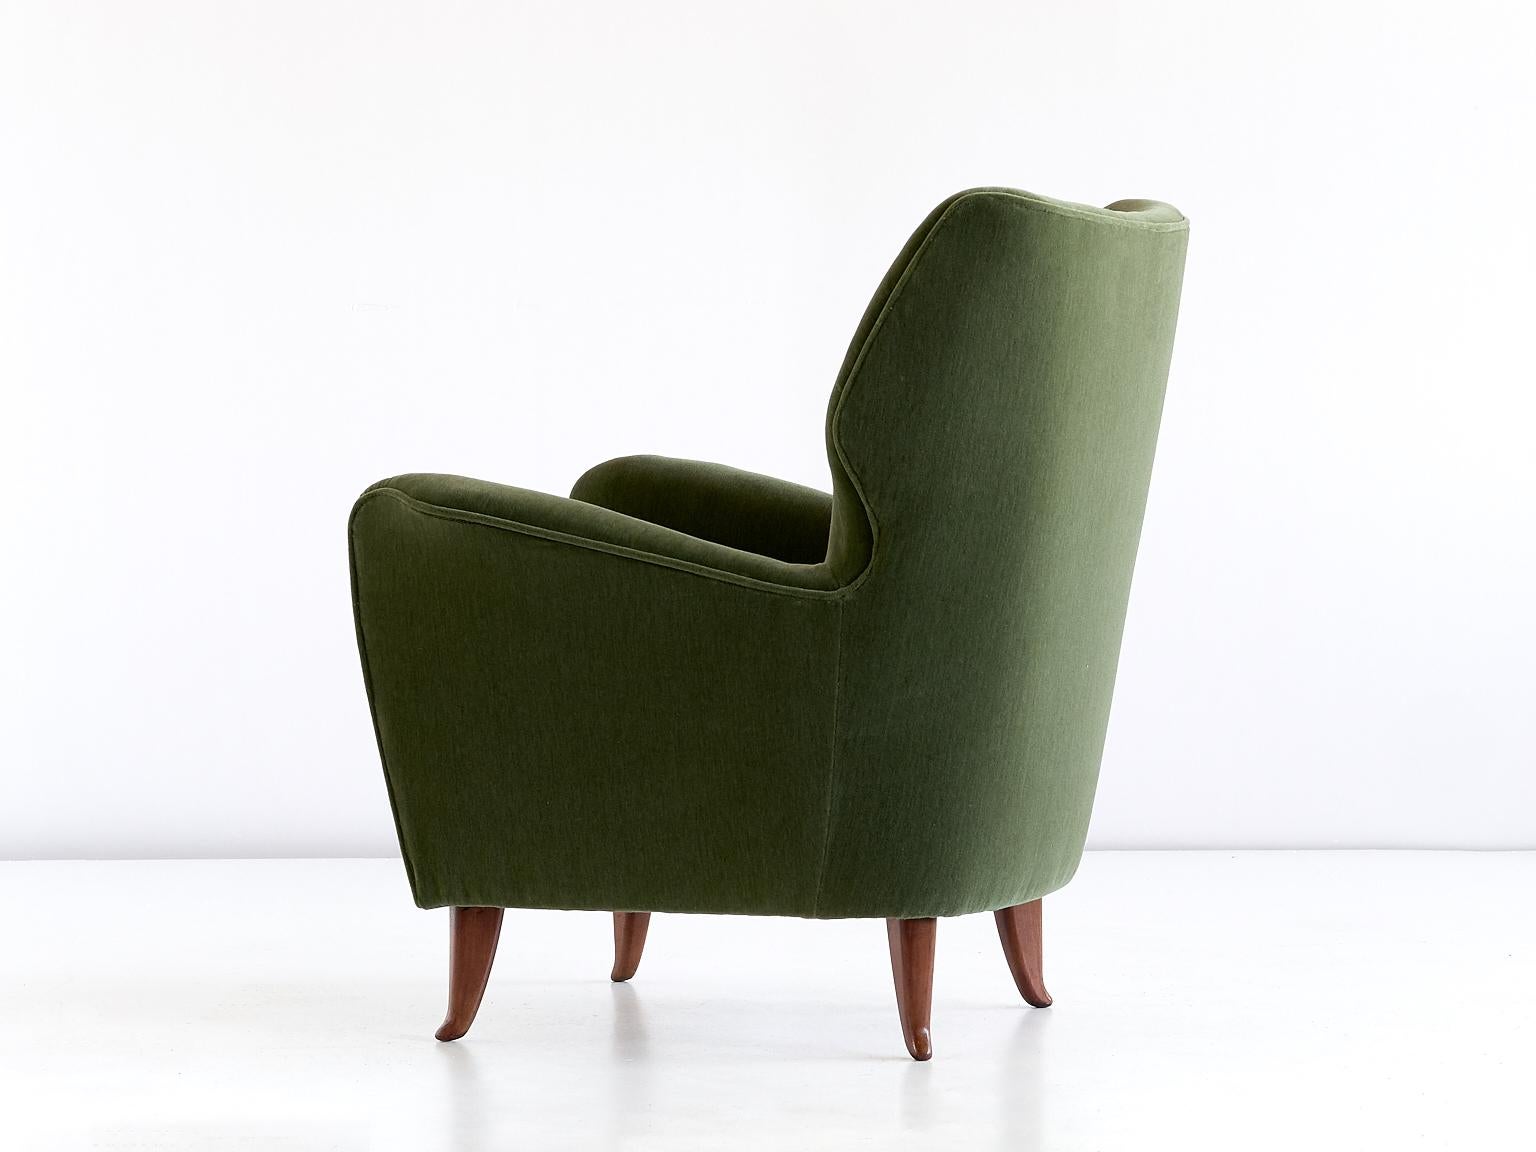 Italian Gio Ponti Pair of Armchairs in Olive Green Velvet and Walnut, Italy, 1949